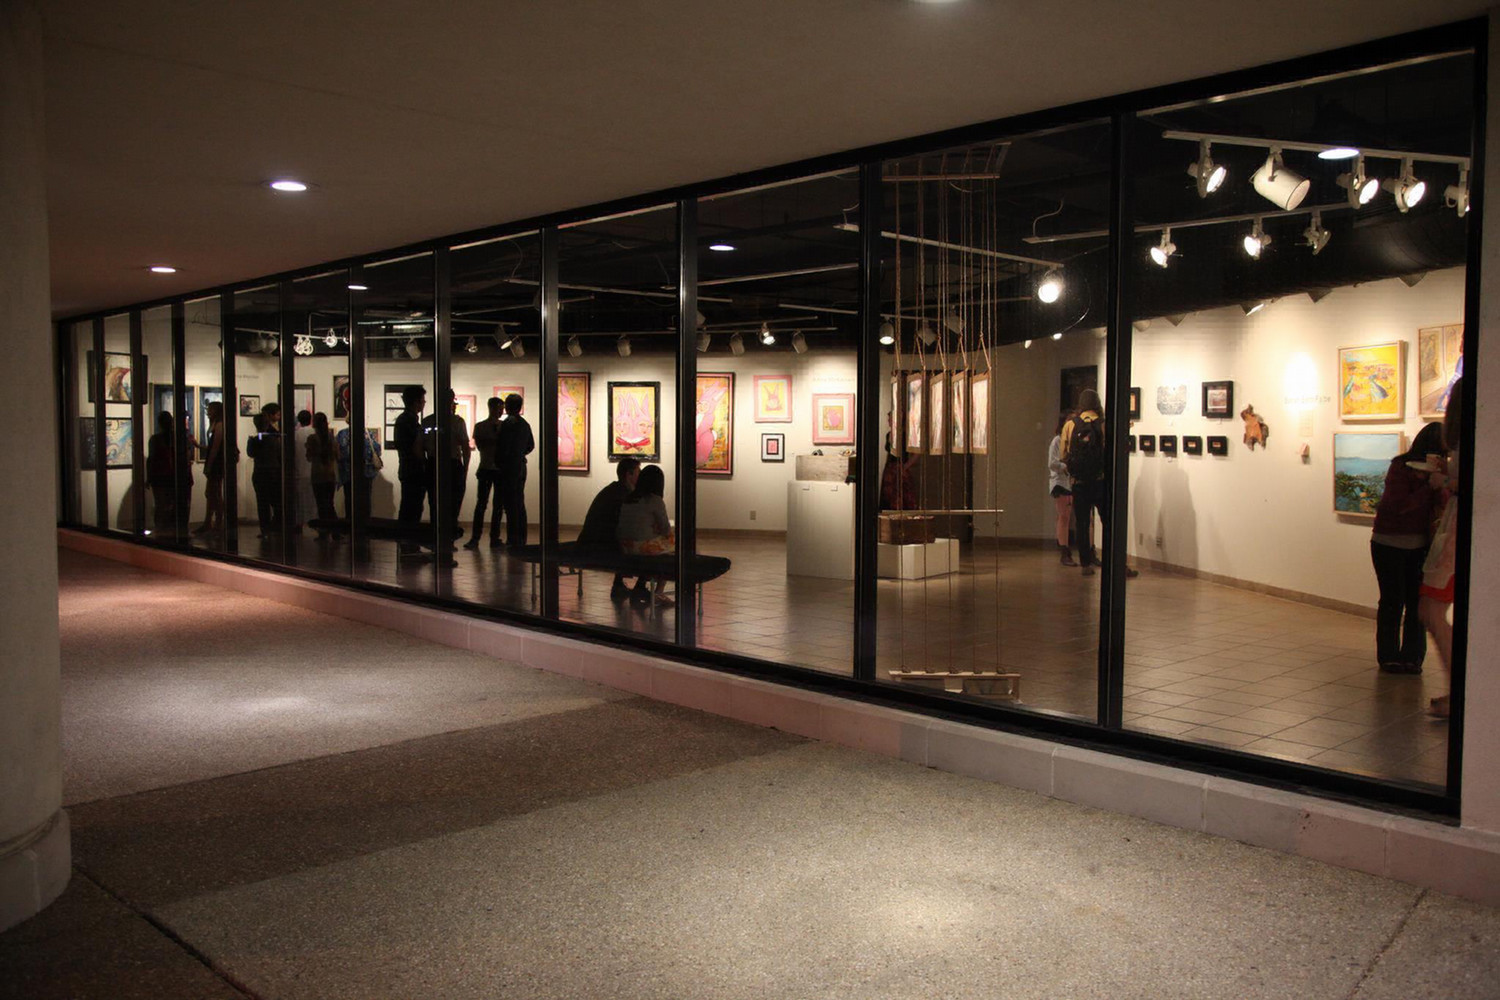 view of gallery 121 from outside